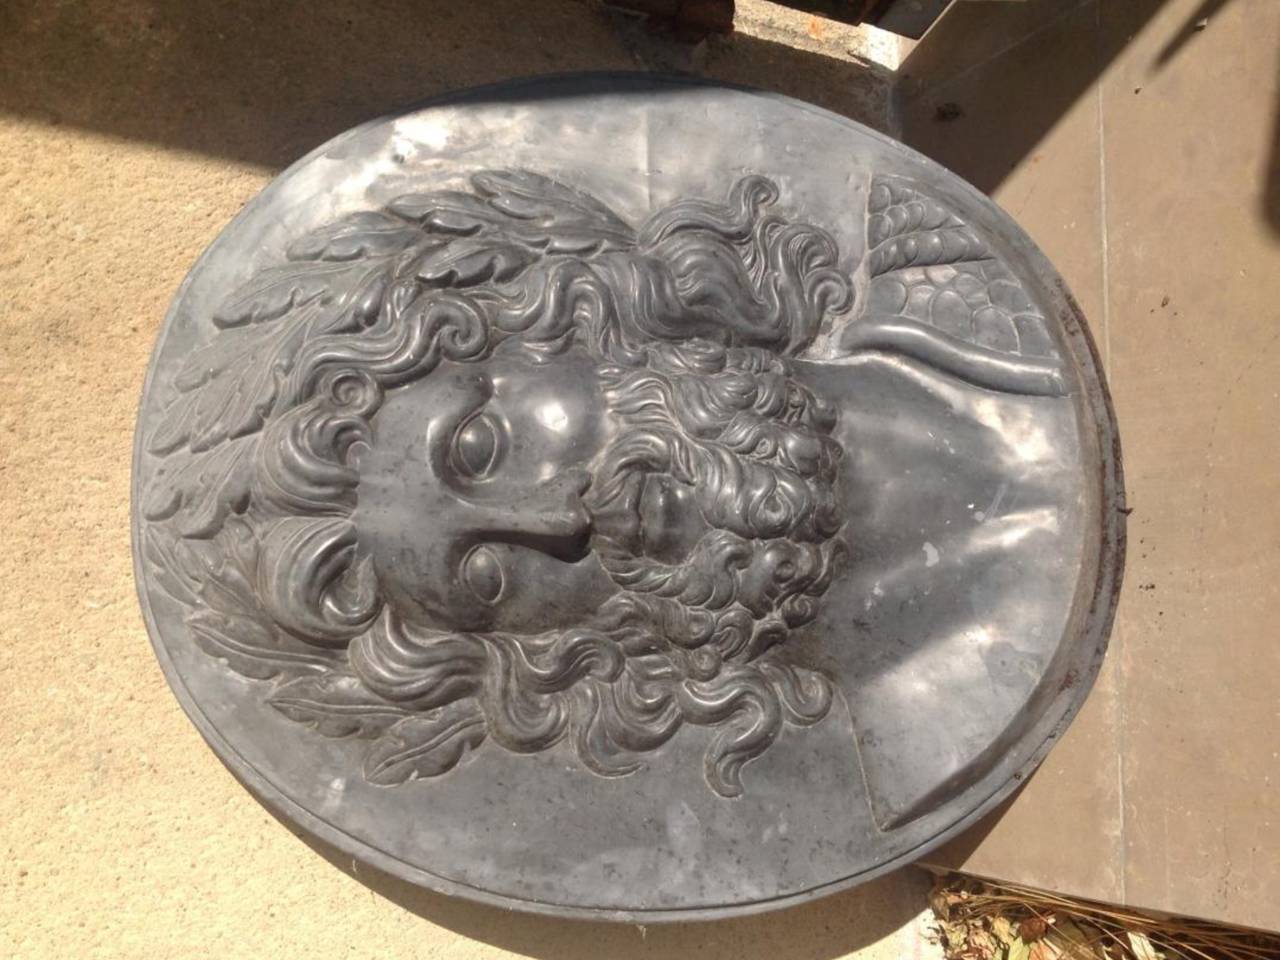 20th Century Empire style medallion representing Zeus. Beautiful medallion depicting the god of Olympus. Black marble dust and mold and compress crushed. Vintage twentieth century. It will decorate a Greek mythology lover interior!!!!!!! Plan to wax